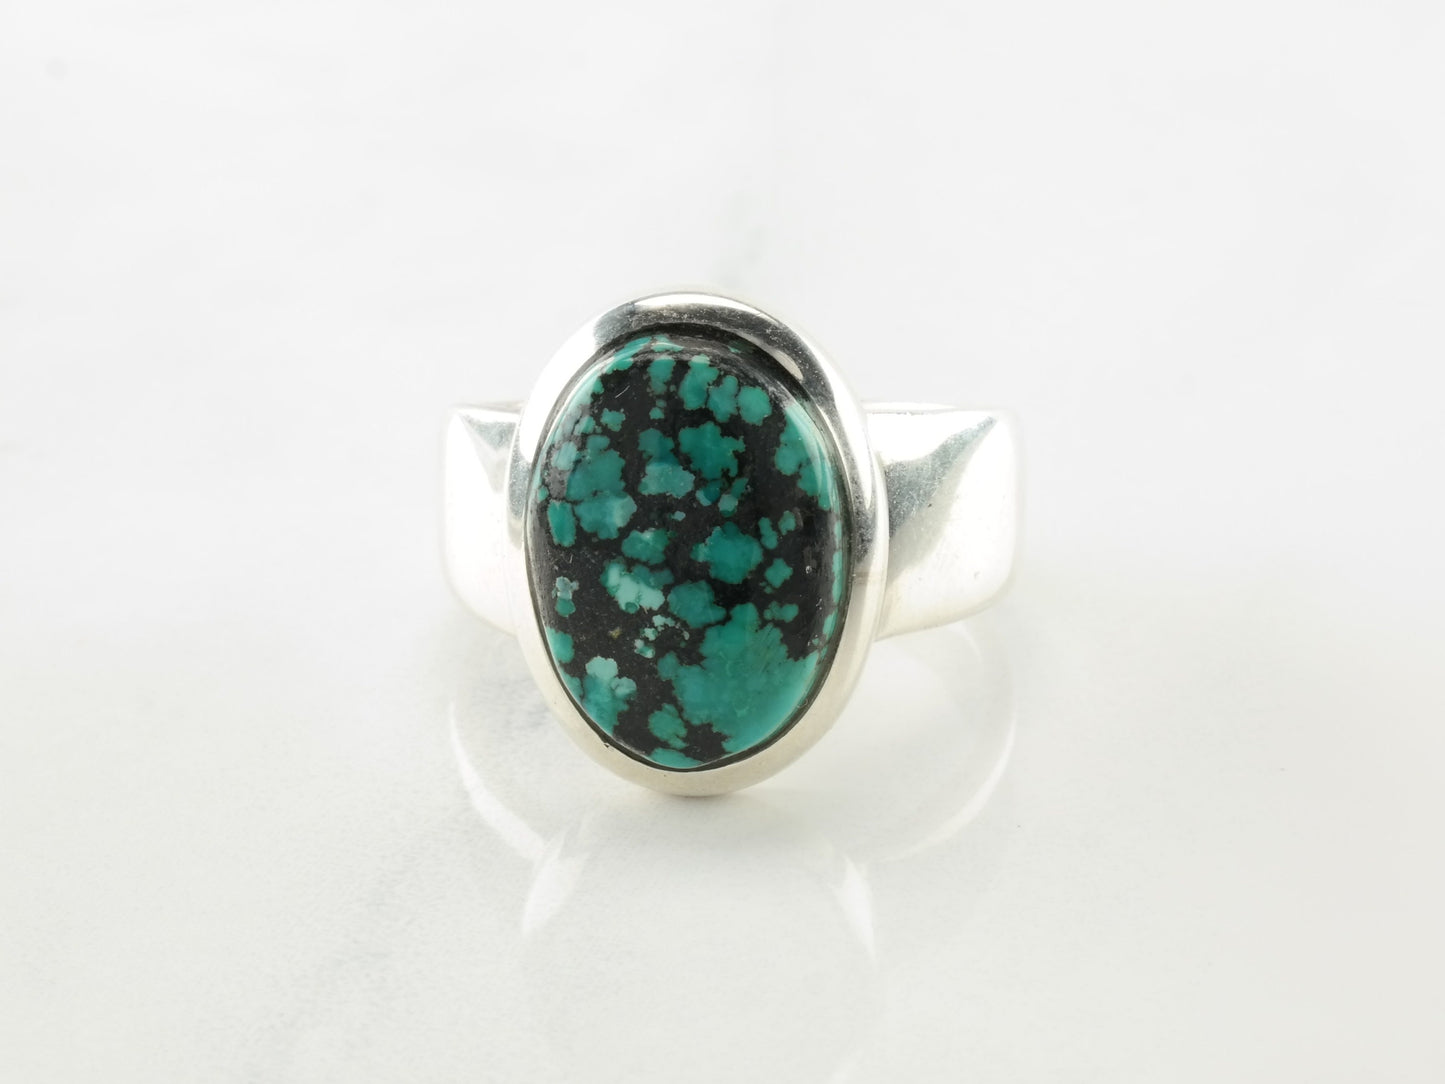 Vintage Southwest Ring Spiderweb Turquoise Sterling Silver Size 8 1/4